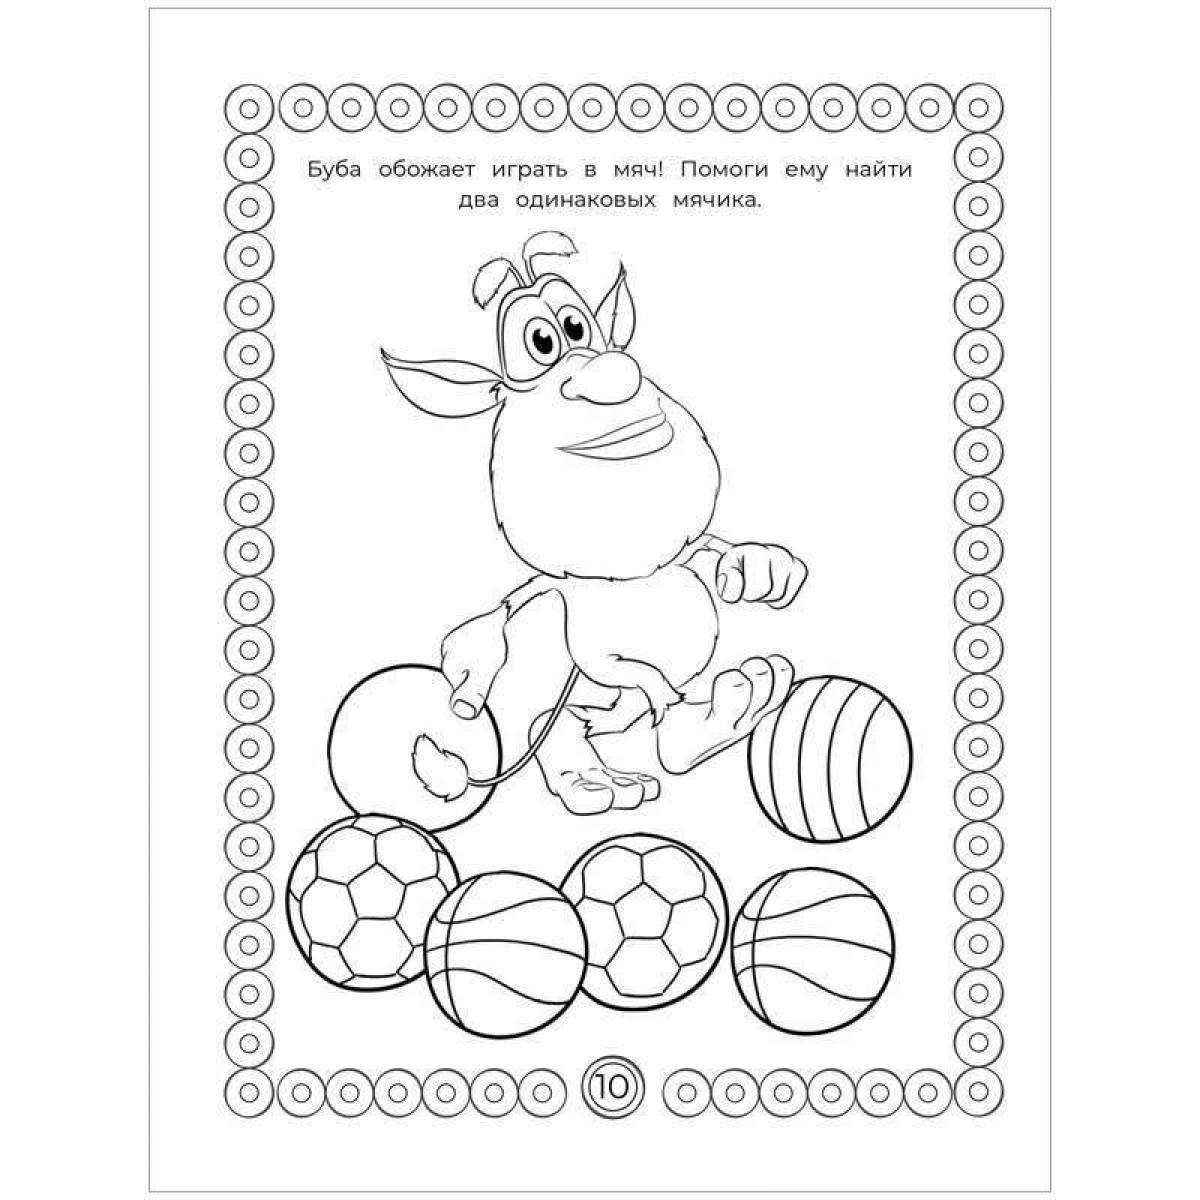 Booba bright coloring book for children 3-4 years old